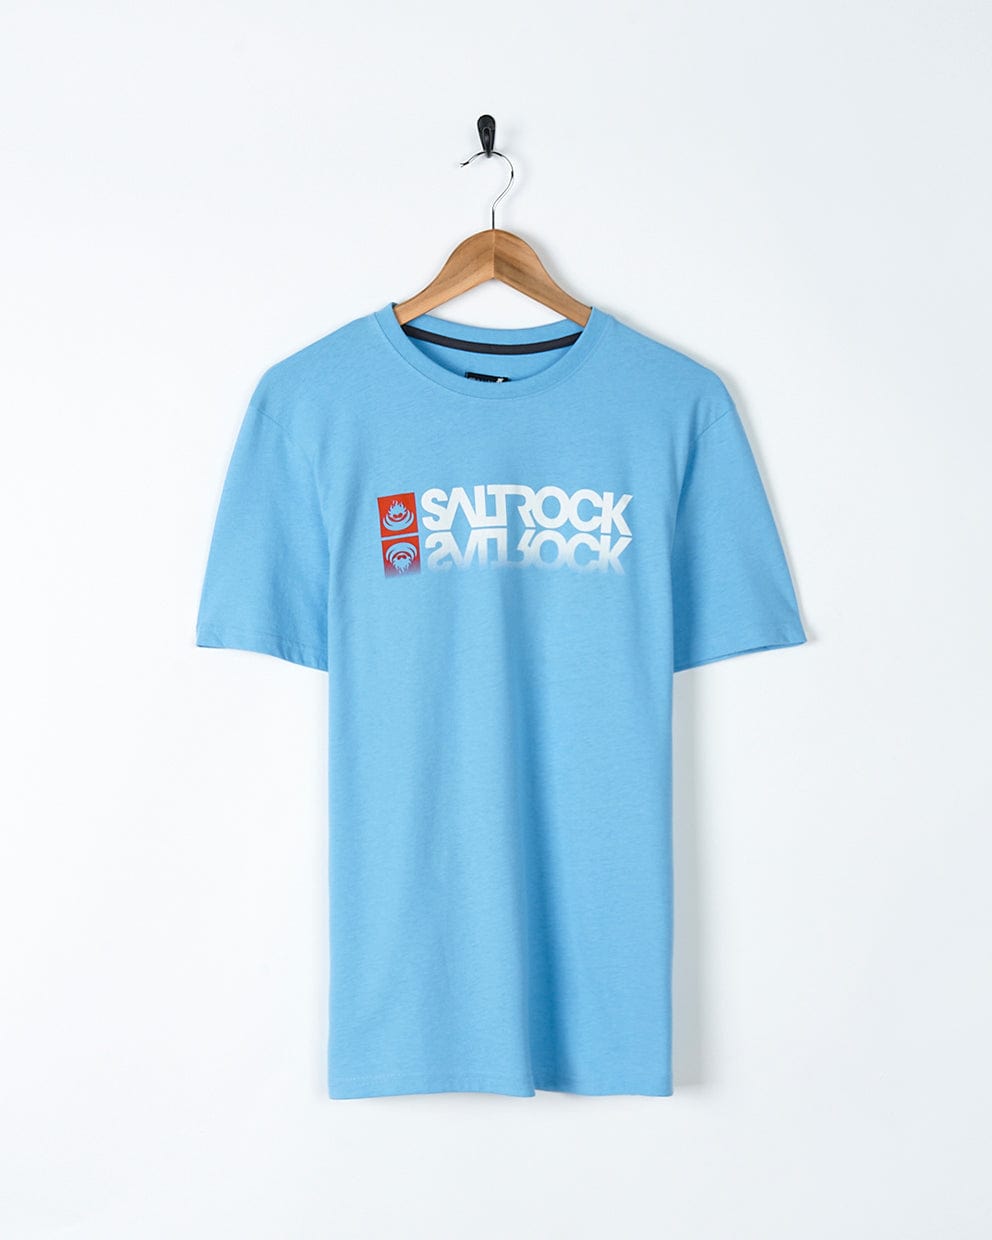 A Reflect - Mens T-Shirt - Blue by Saltrock with a white logo on it. The shirt is made of a Cotton/Polyester blend and has a crew neck.